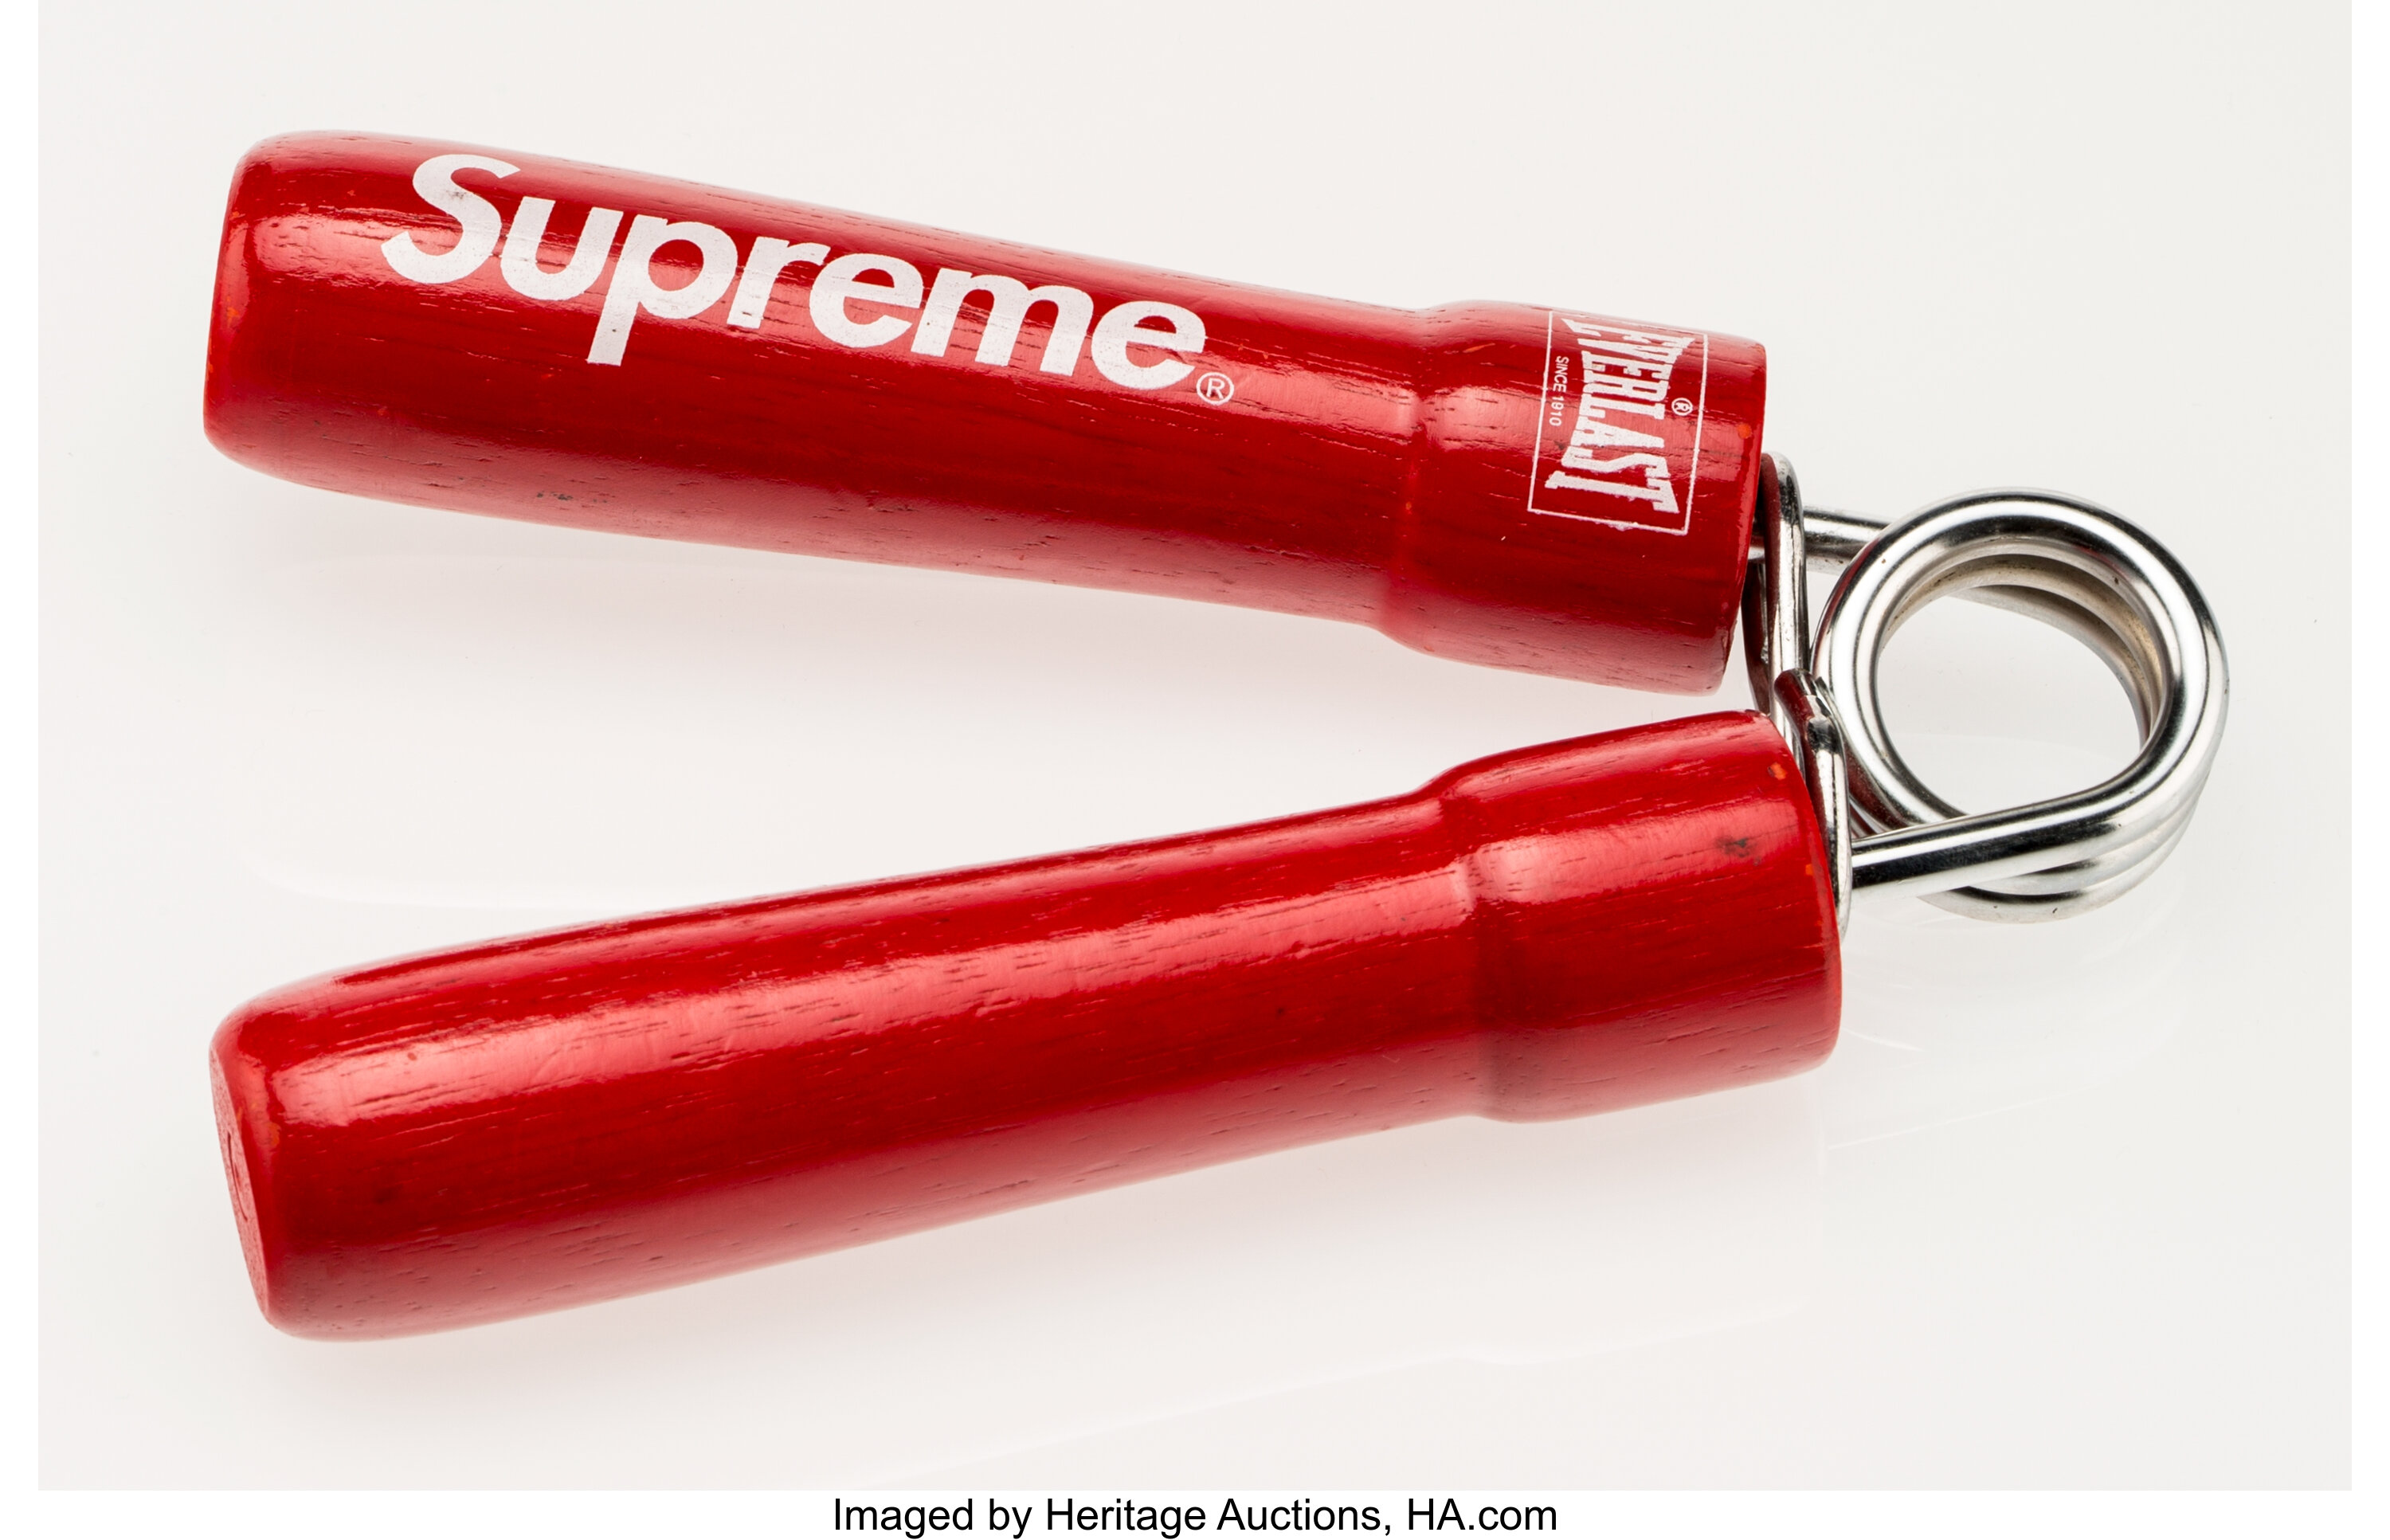 Sold at Auction: SUPREME KEYCHAIN